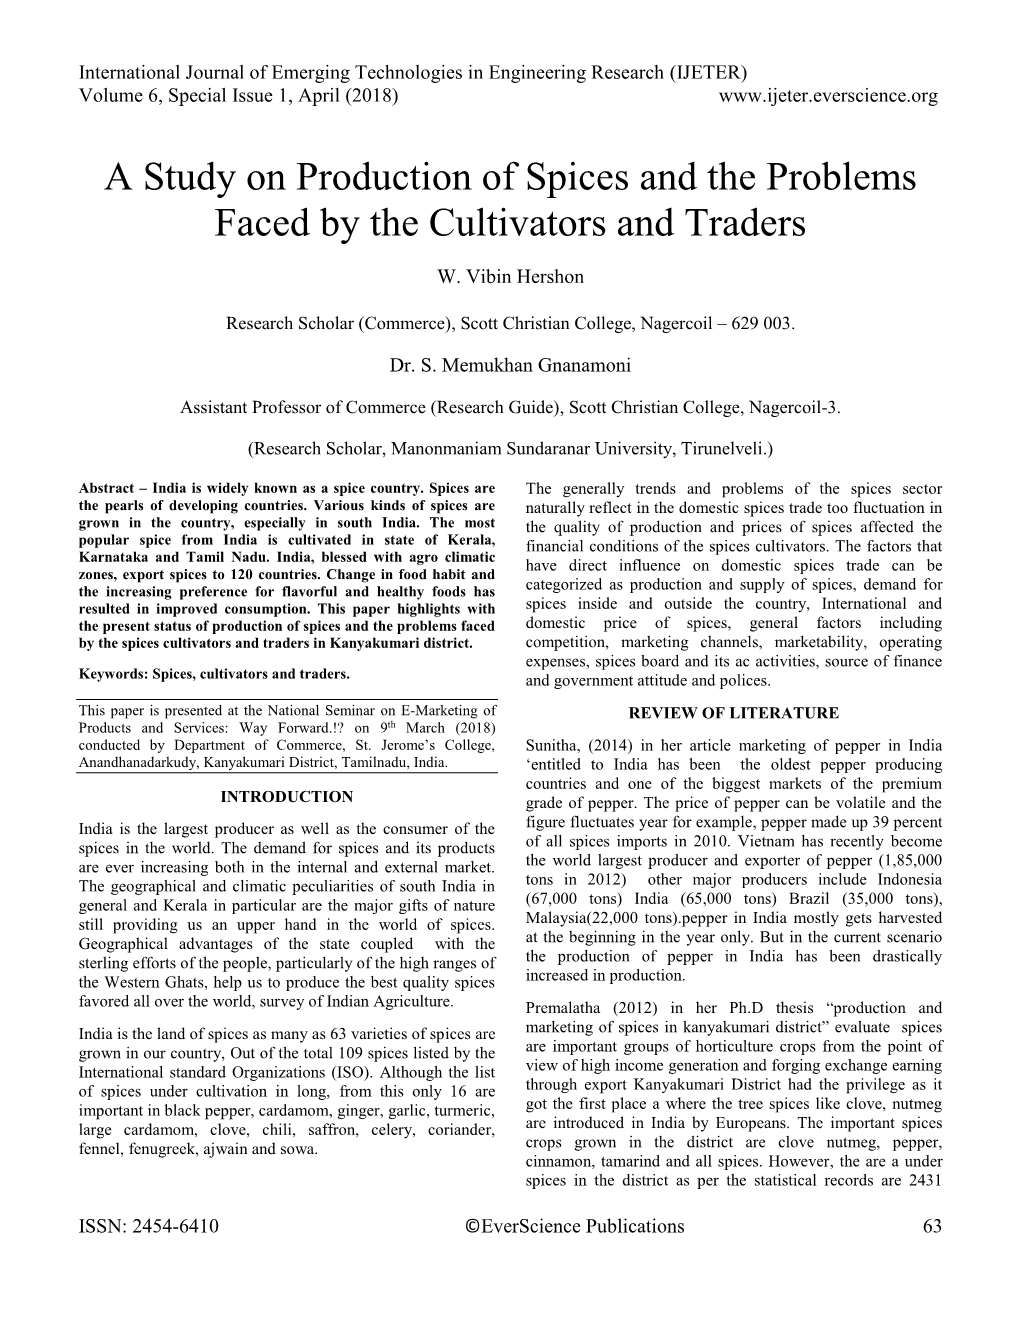 A Study on Production of Spices and the Problems Faced by the Cultivators and Traders